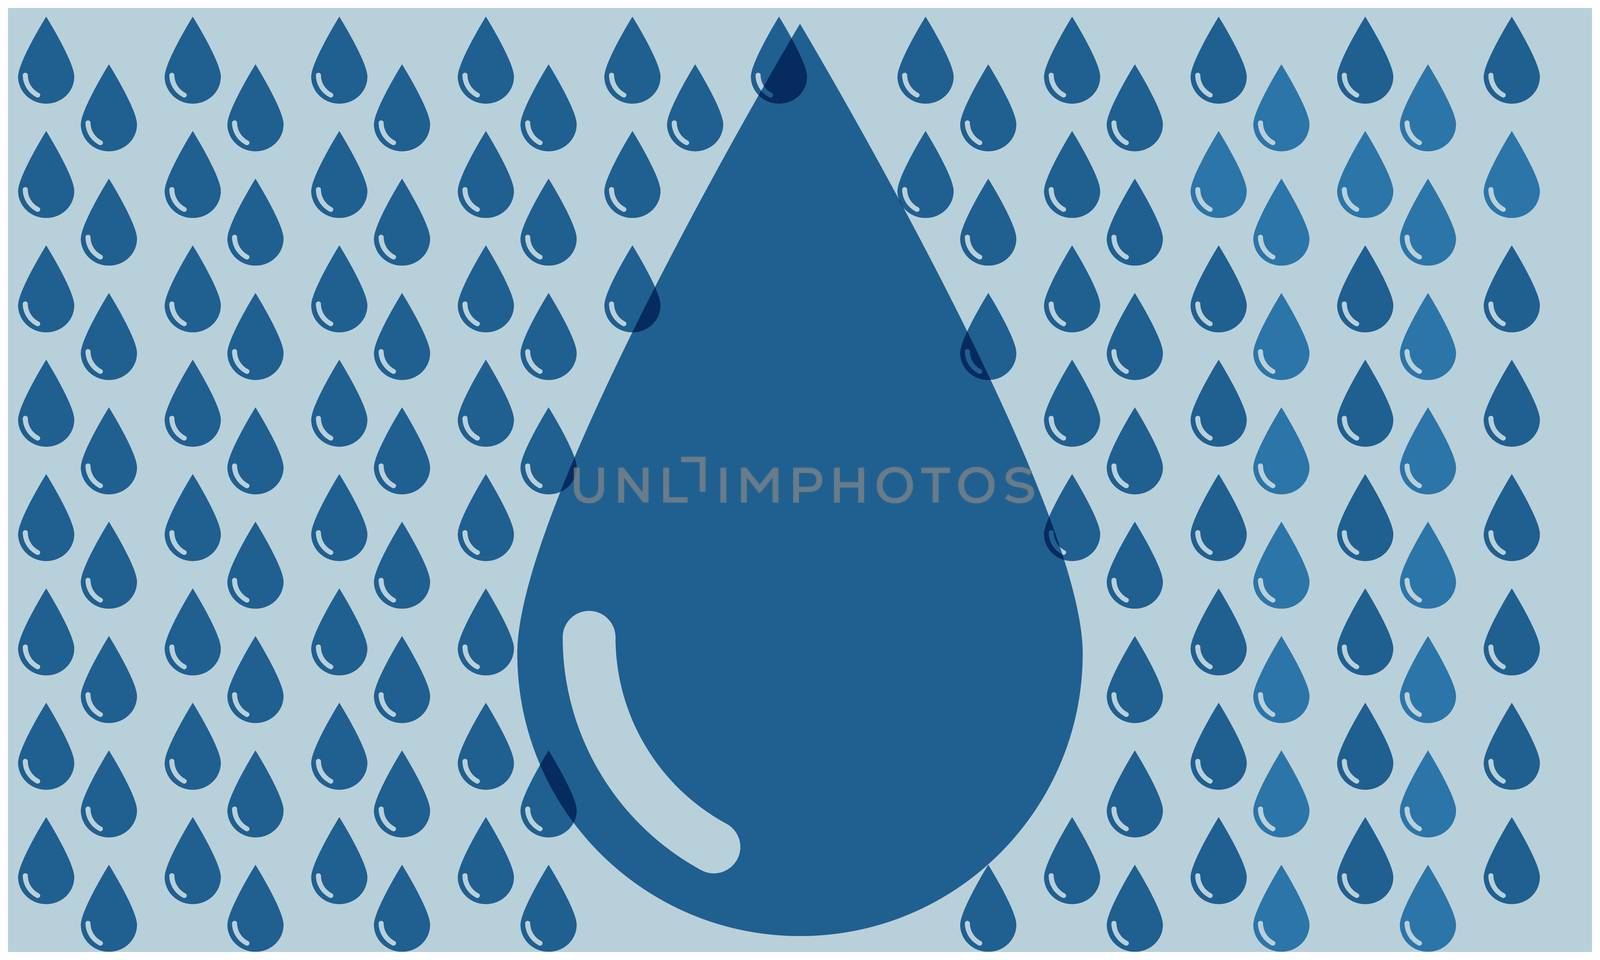 digital textile design of water drops on abstract background